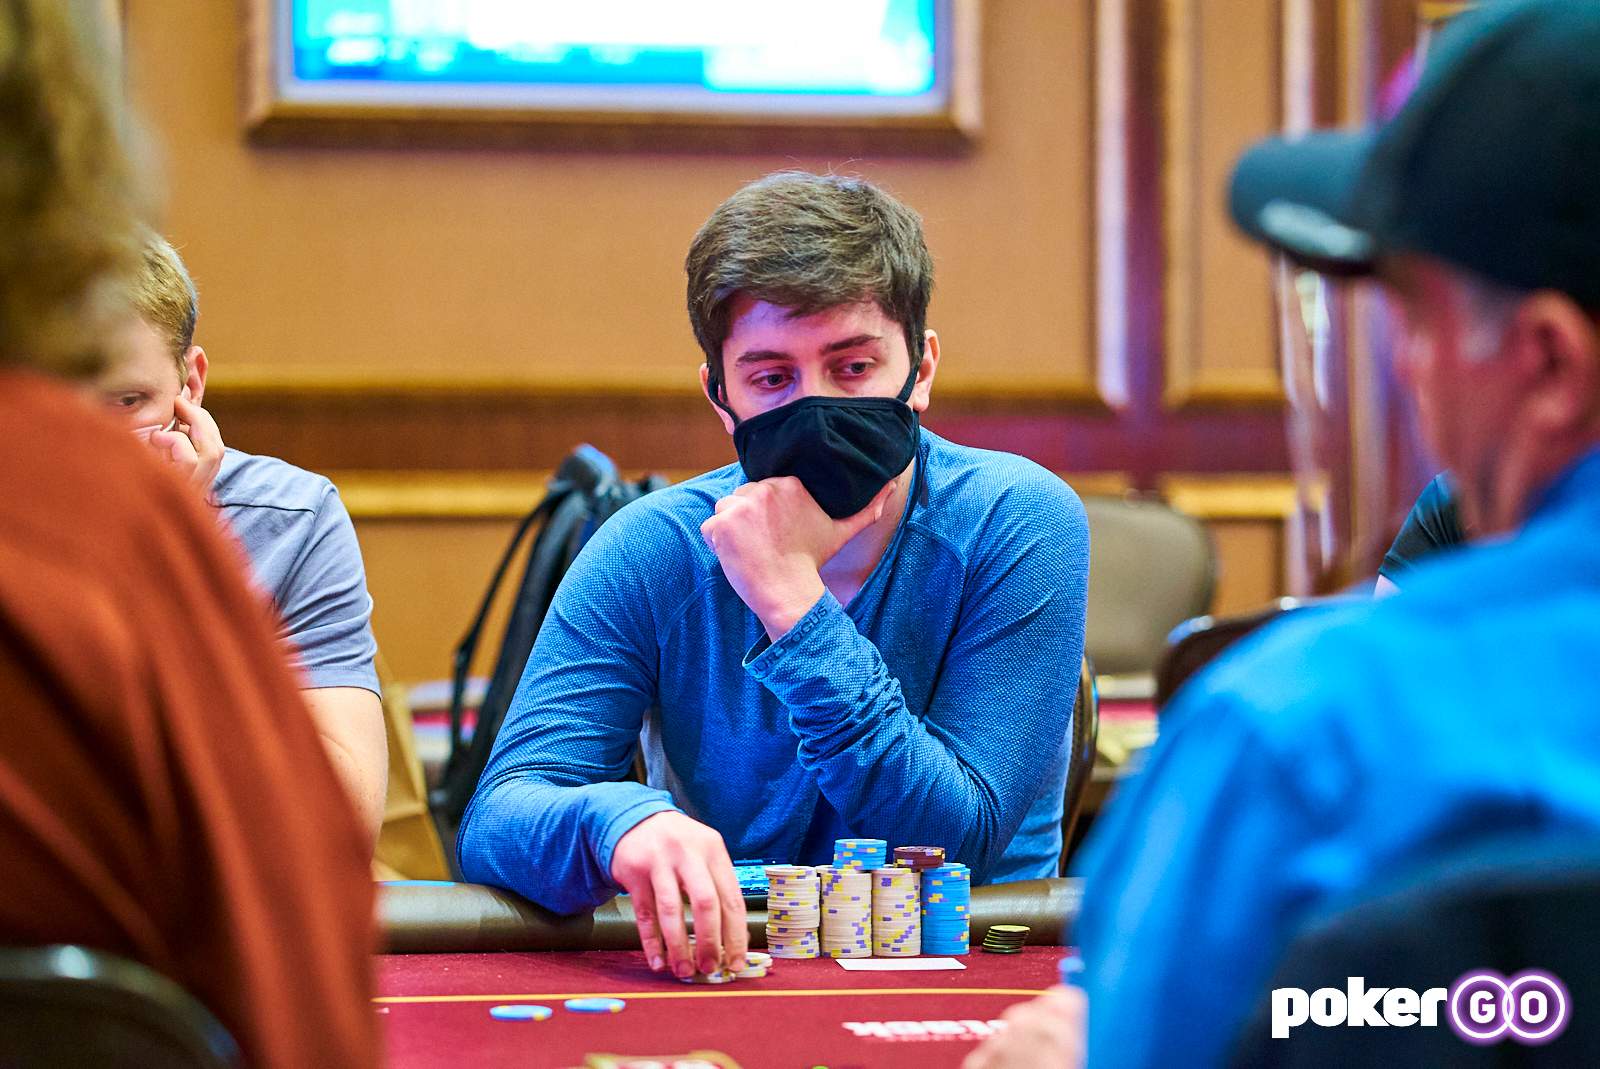 Ali Imsirovic Defeats Eric Worre Heads-Up to Win Event #5: $10,000 No-Limit Hold'em